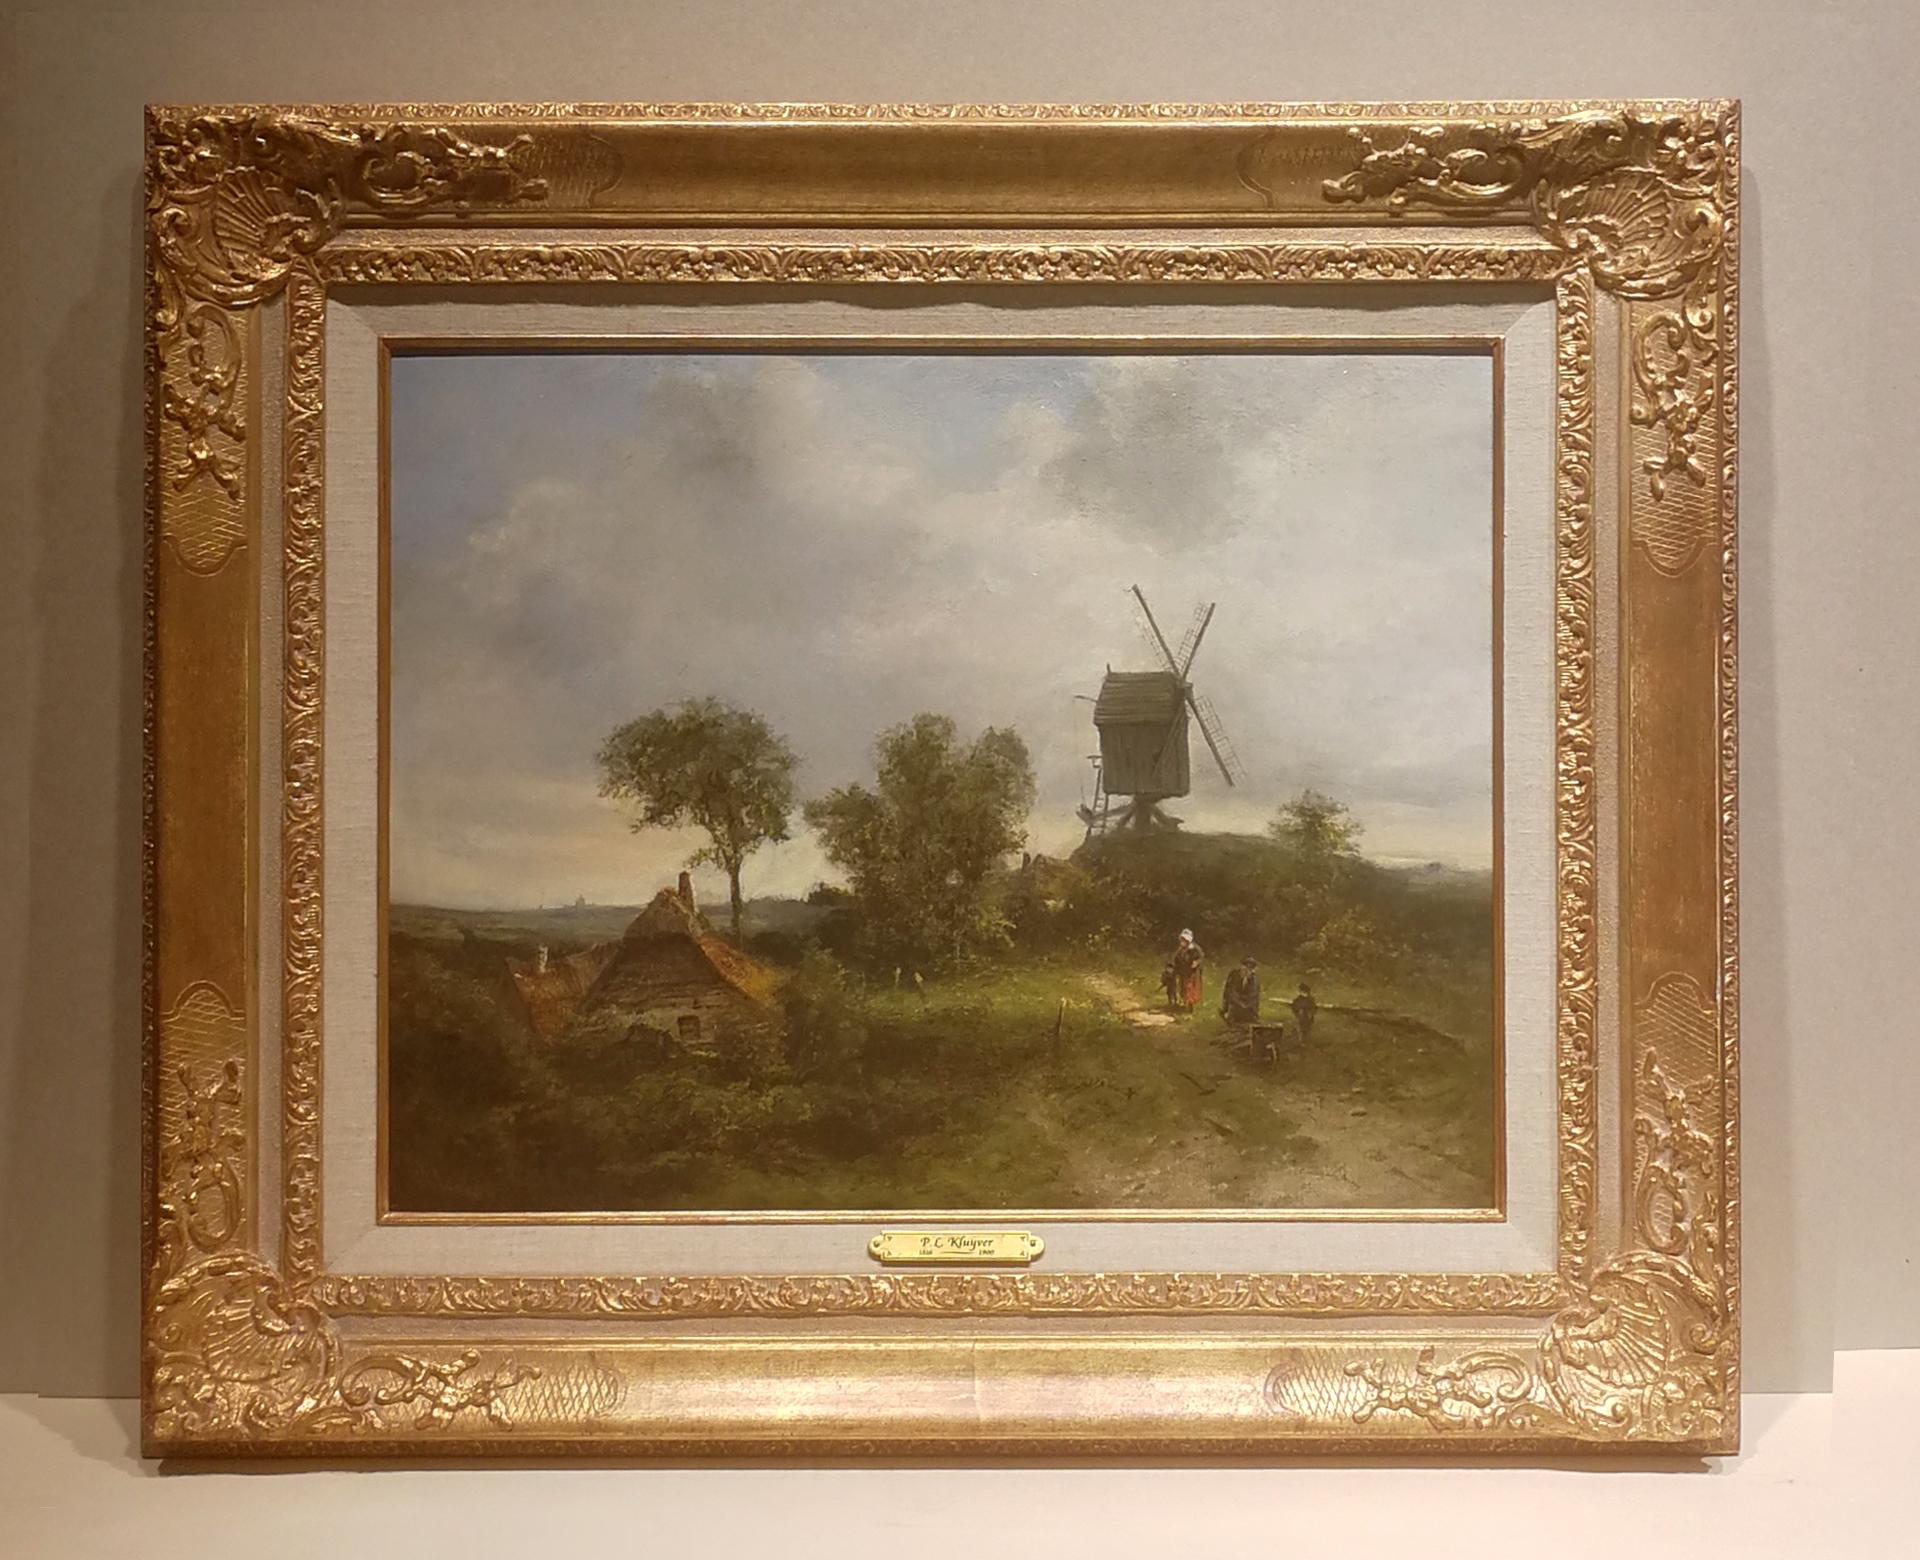 Netherlands, 1816-1900

Pieter Lodewijk Francisco Kluyver (1816-1900) is known as one of the great names in the genre of the Dutch Romantic School, with his detailed and atmospheric Dutch landscapes.
He lived and worked in Amsterdam until 1848.
He